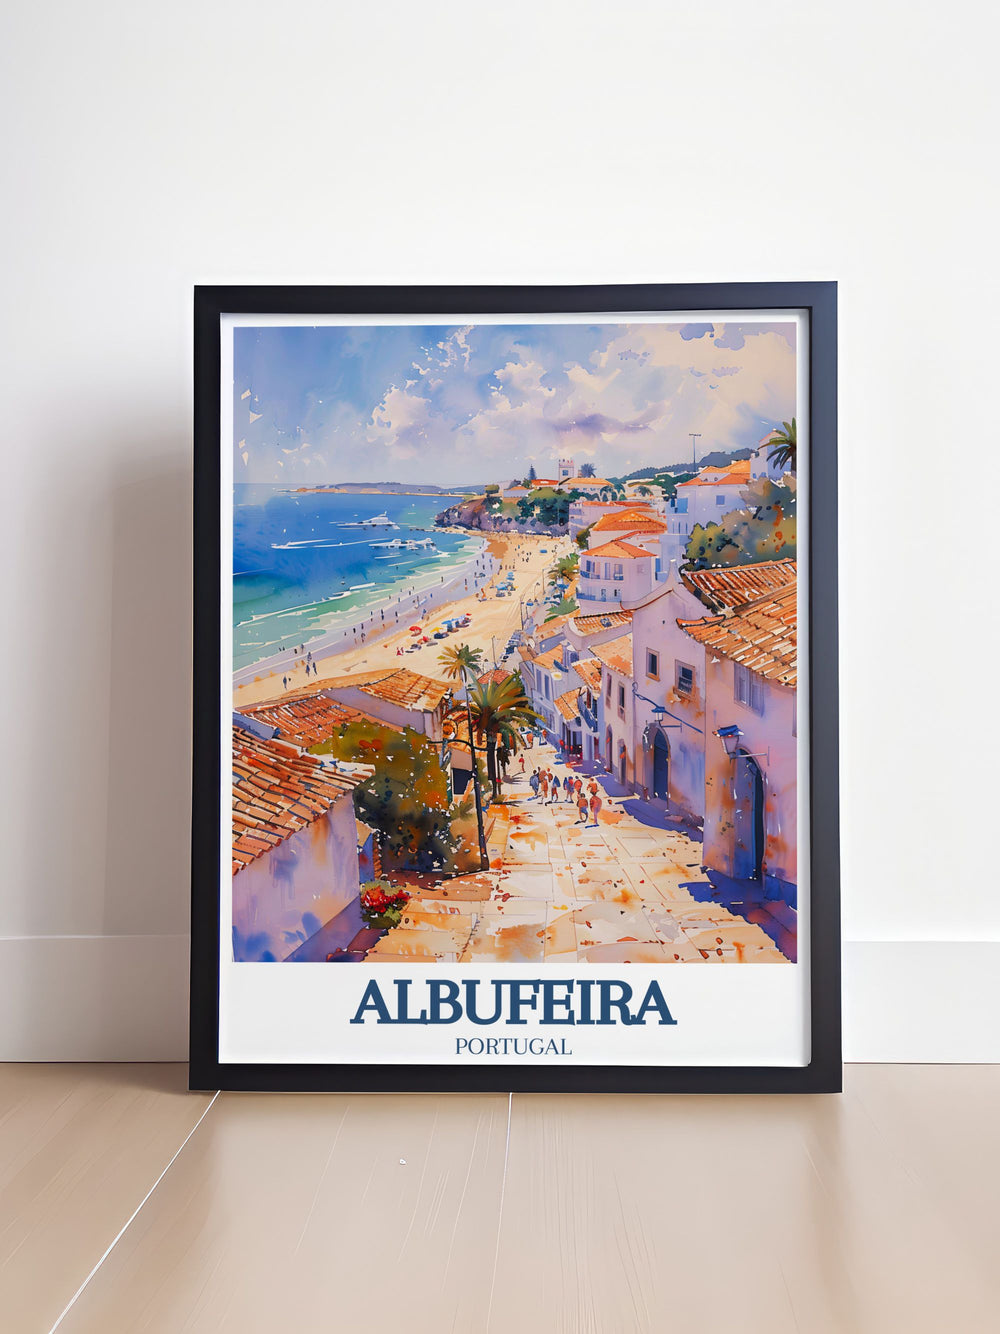 Beautiful Albufeira art print capturing the vibrant energy of Strip de Albufeira with its lively bars and bustling nightlife, perfect for home decor.